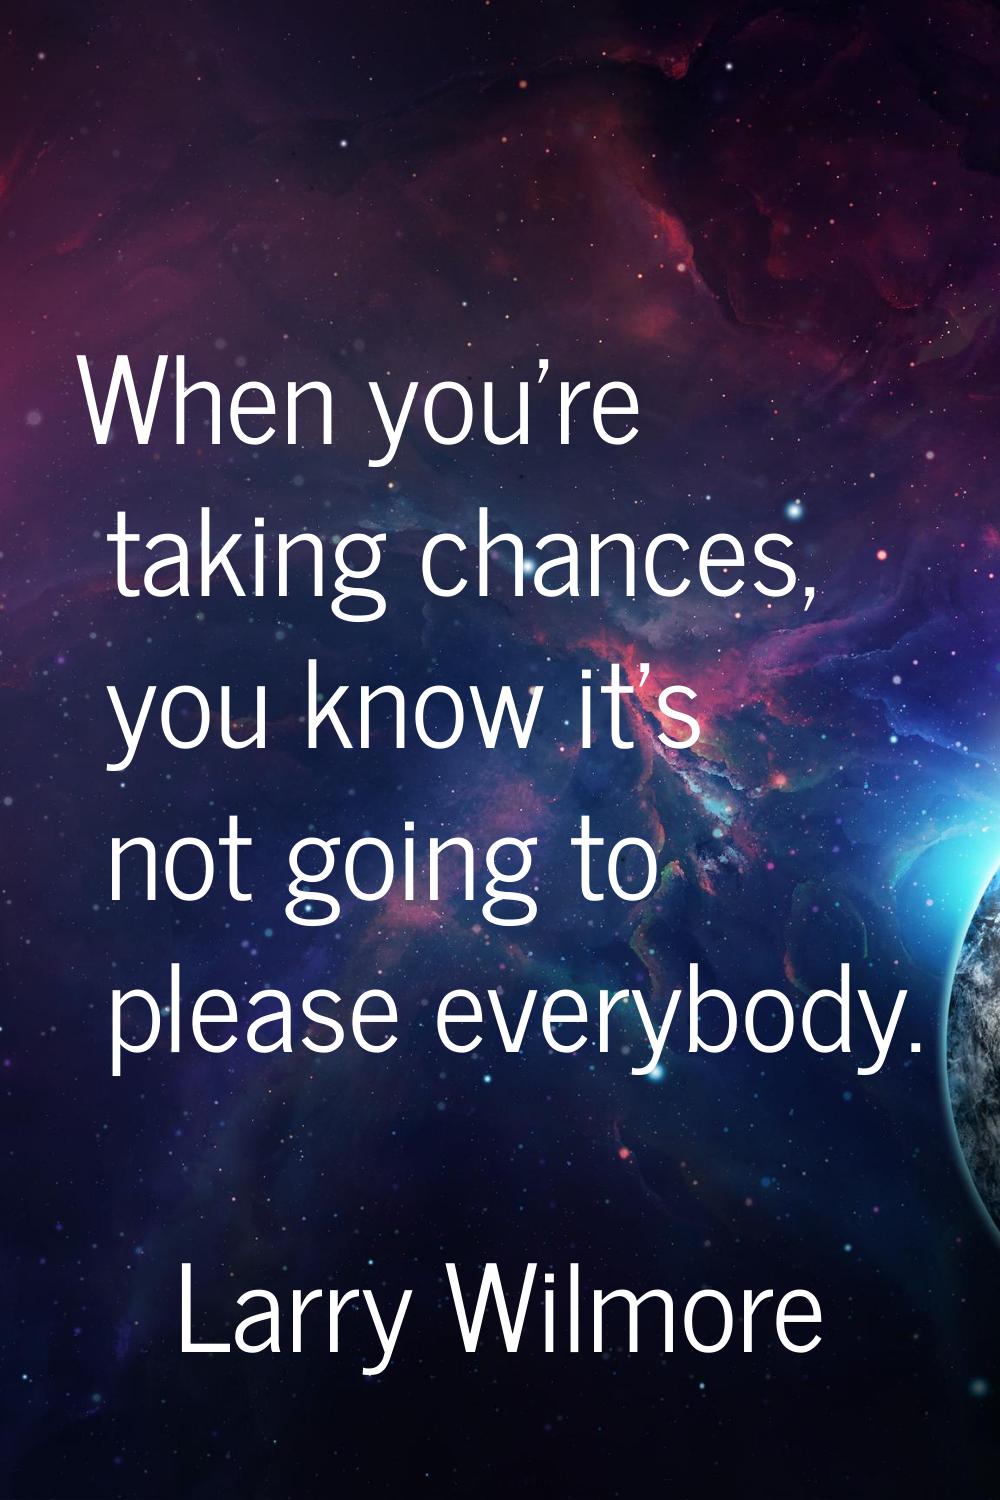 When you're taking chances, you know it's not going to please everybody.